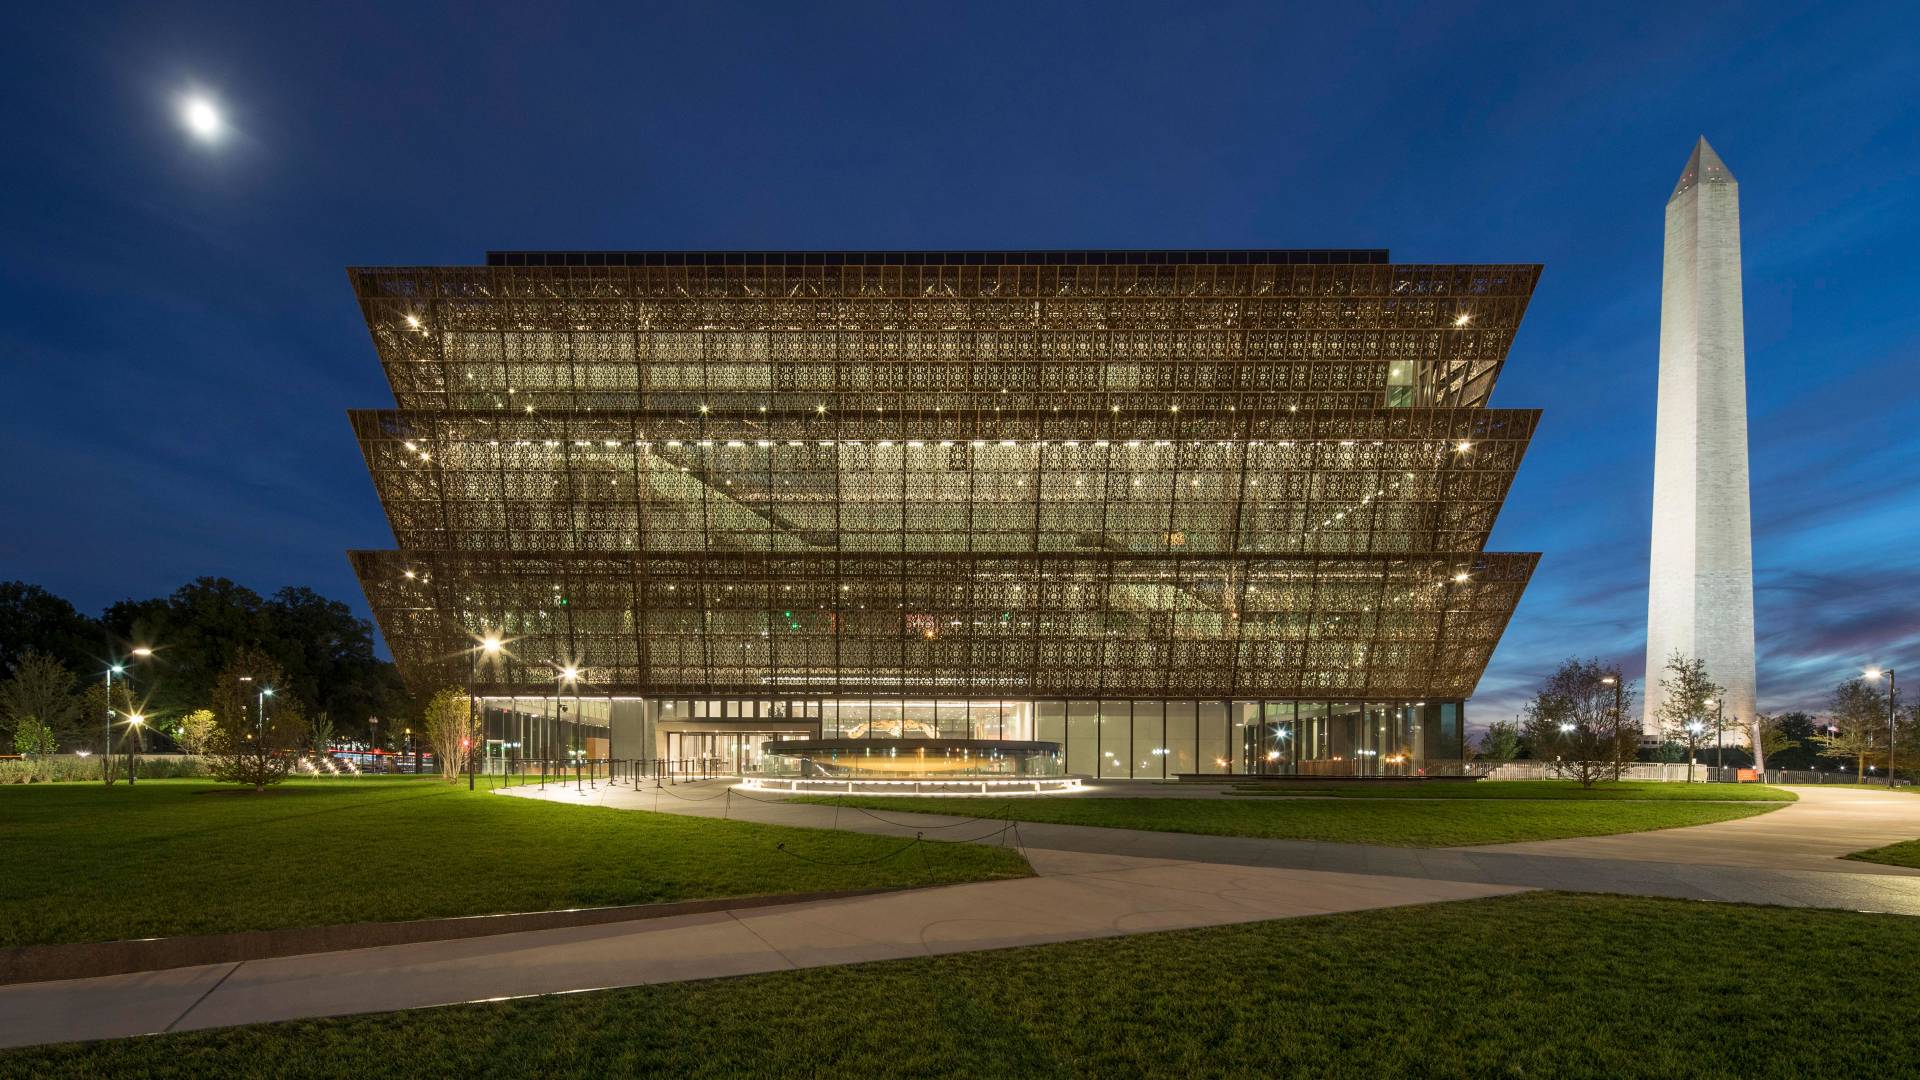 the Smithsonian Institute National Museum of African American History and Culture